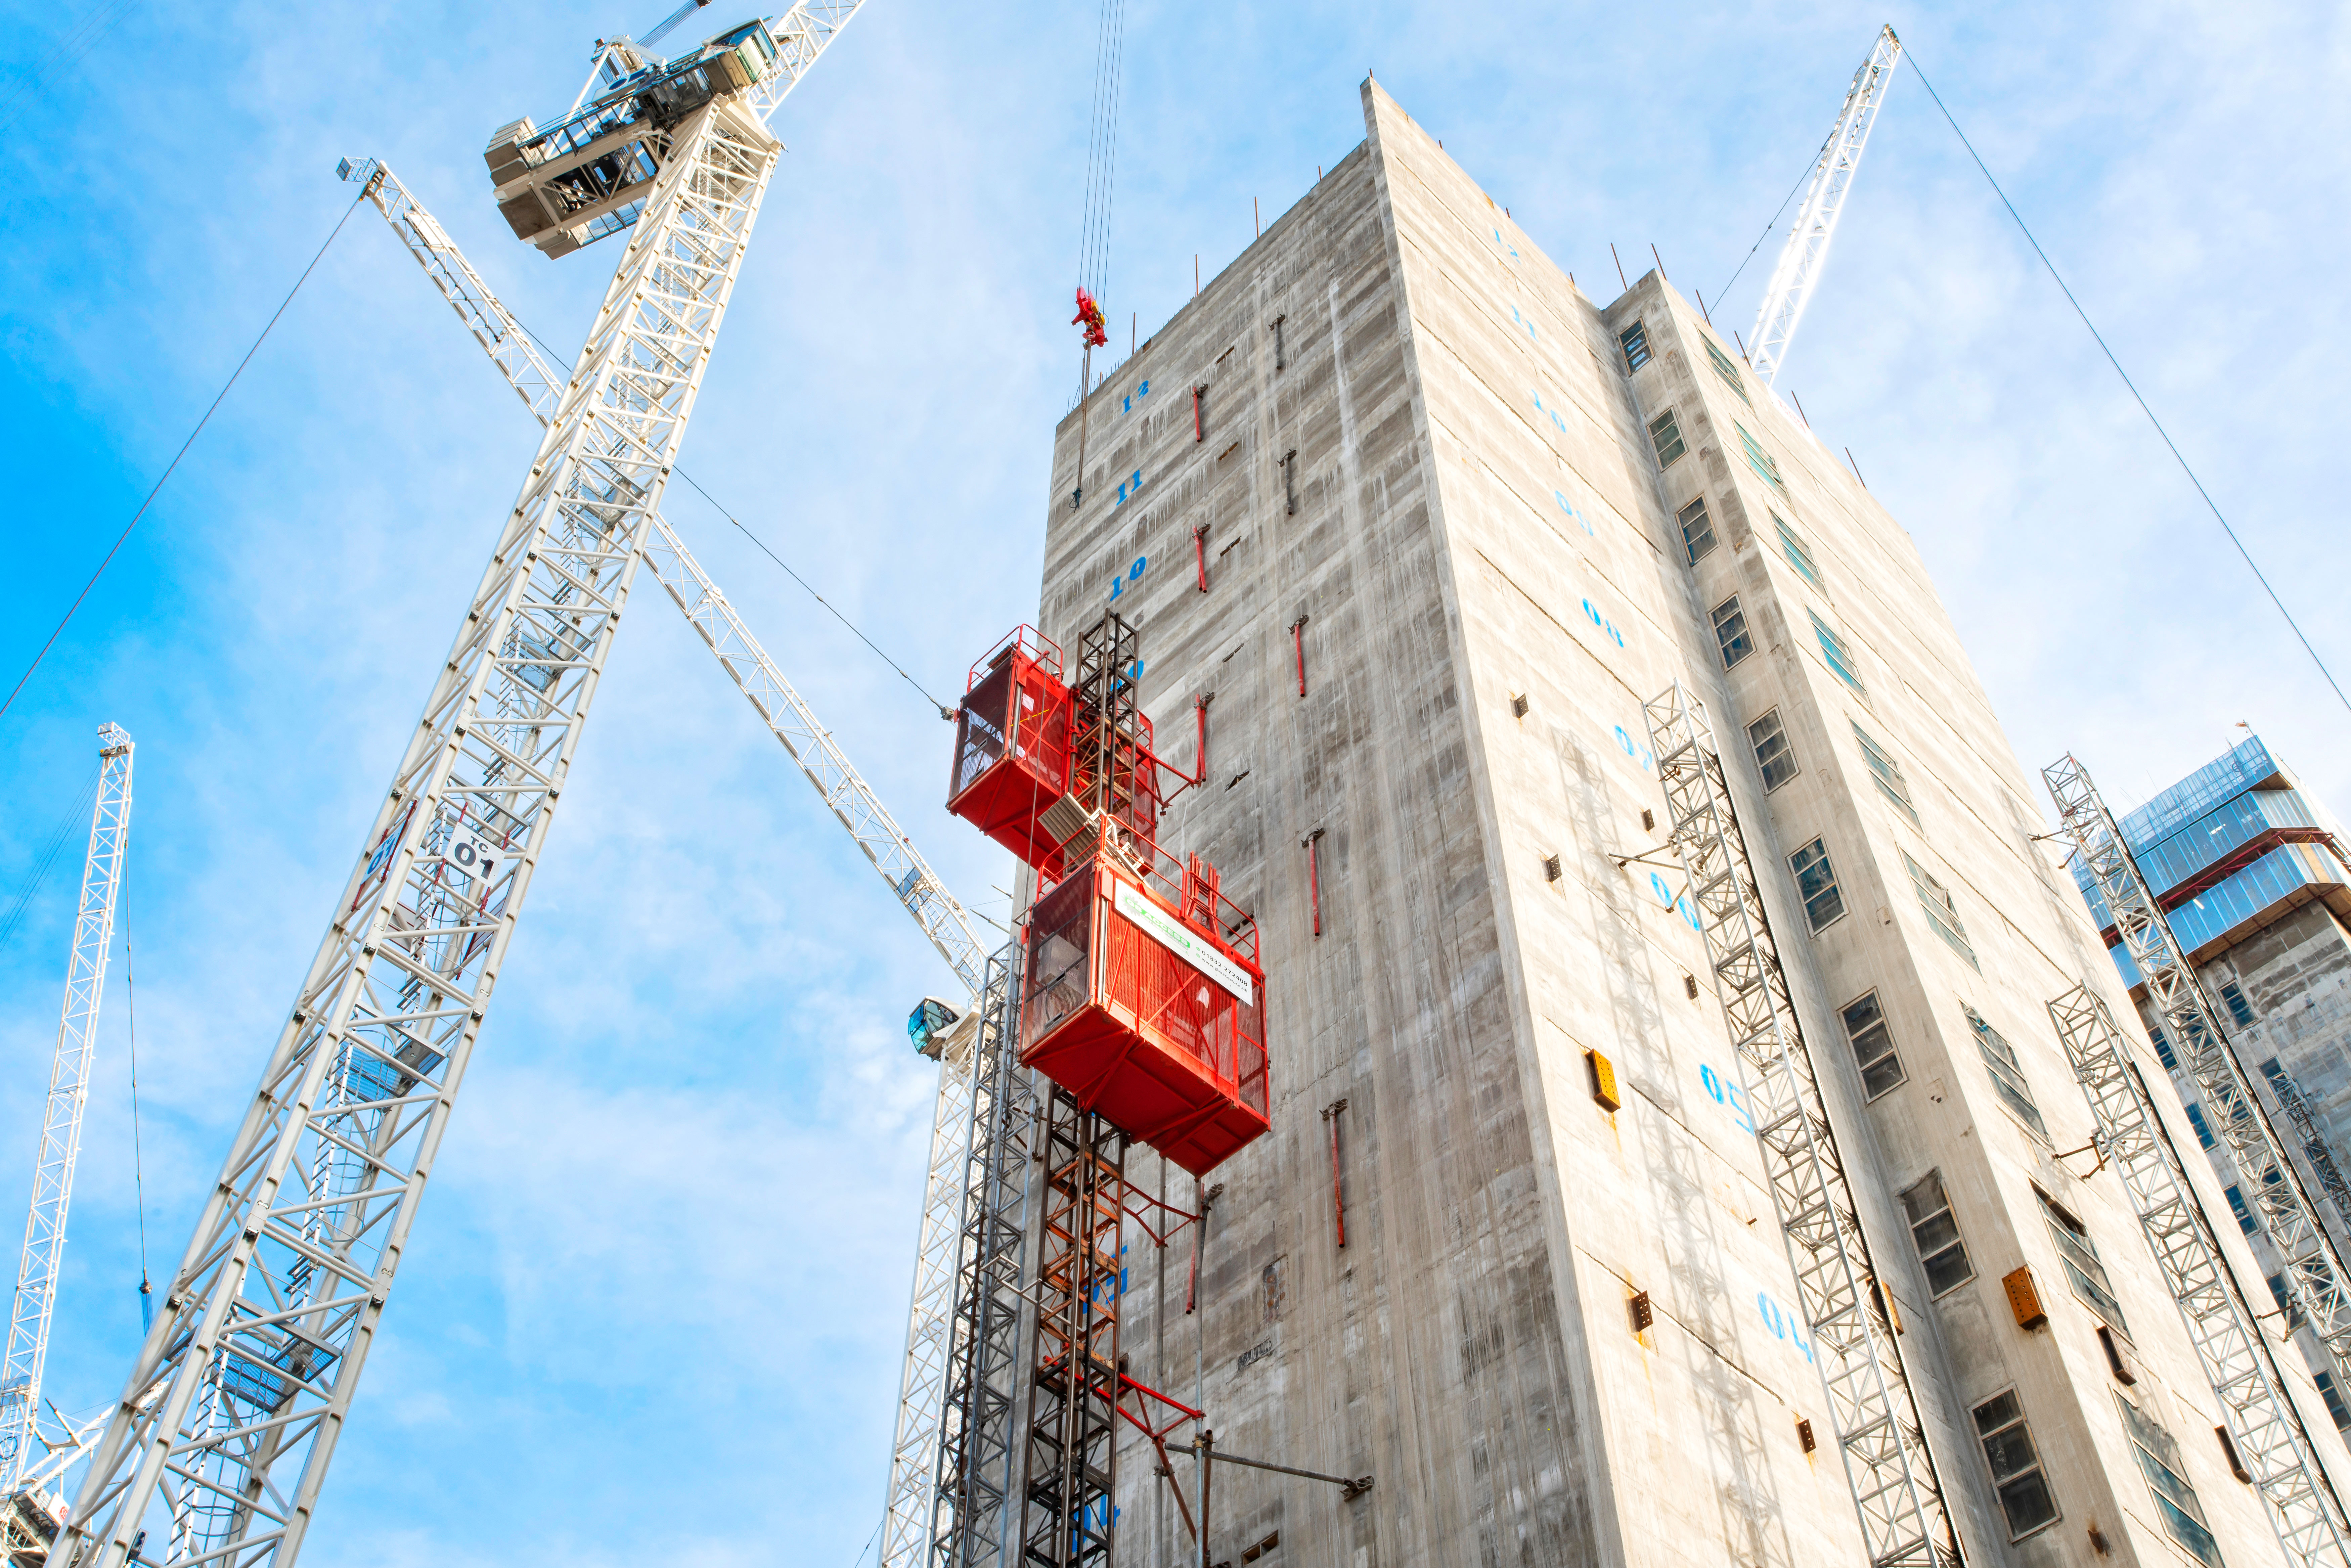 Sunbelt Rentals Hoists in action at Circle Square, Manchester